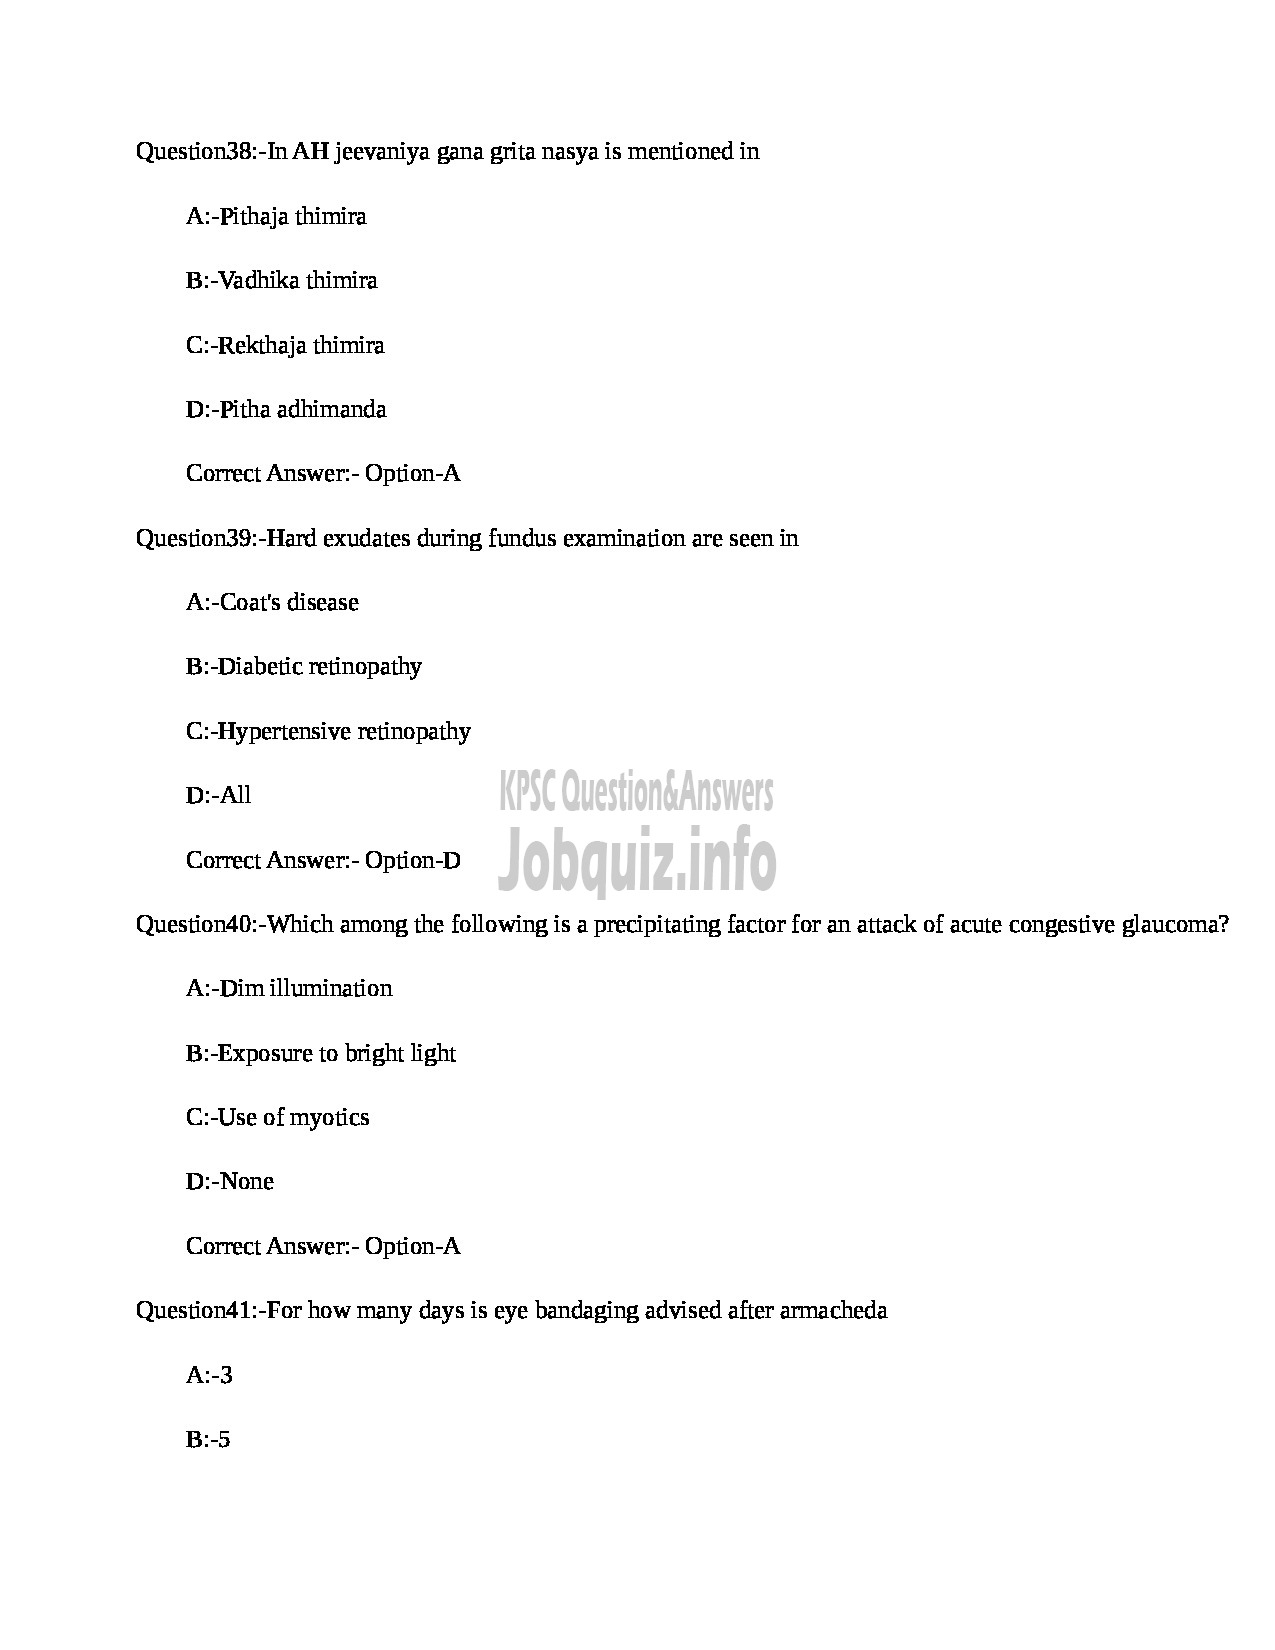 Kerala PSC Question Paper - MEDICAL OFFICER (NETRA) INDIAN SYSTEMS OF MEDICINE-12